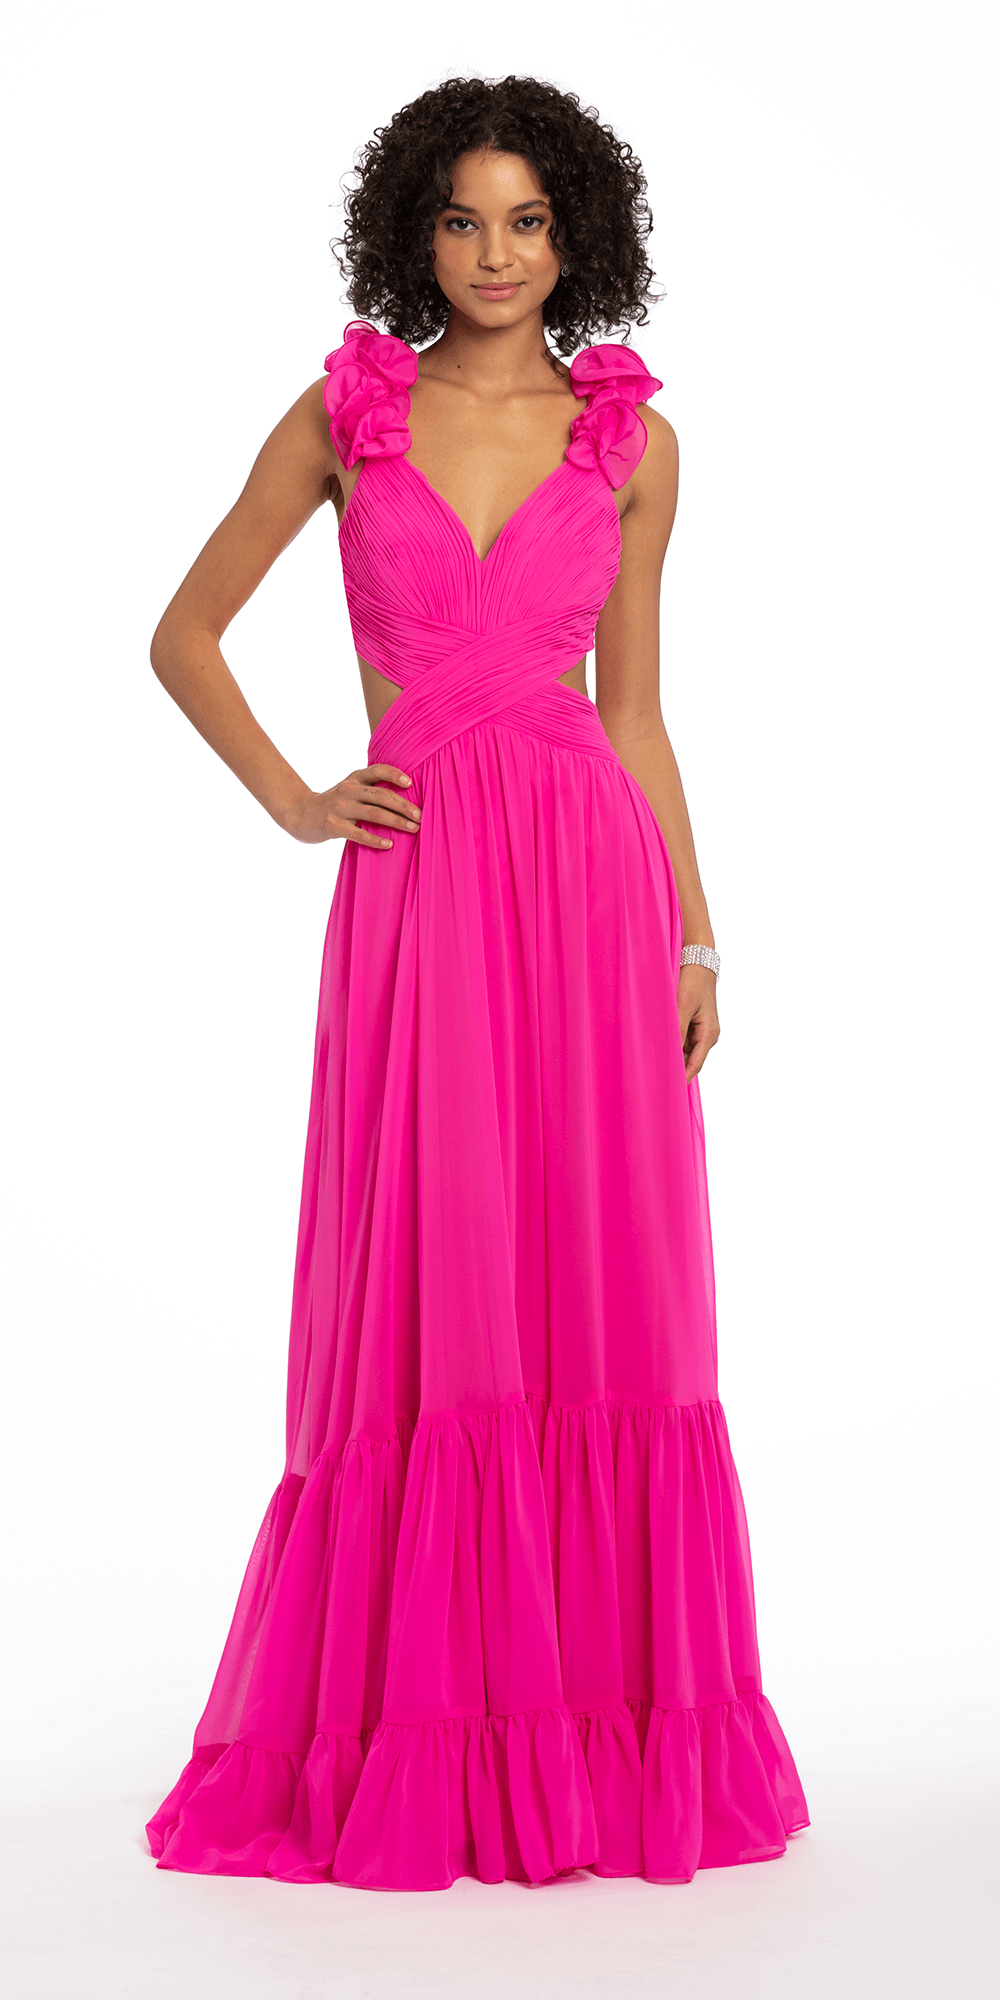 Camille La Vie Ruched Chiffon Front Dress with Shoulder Ruffles missy / 0 / bright-pink